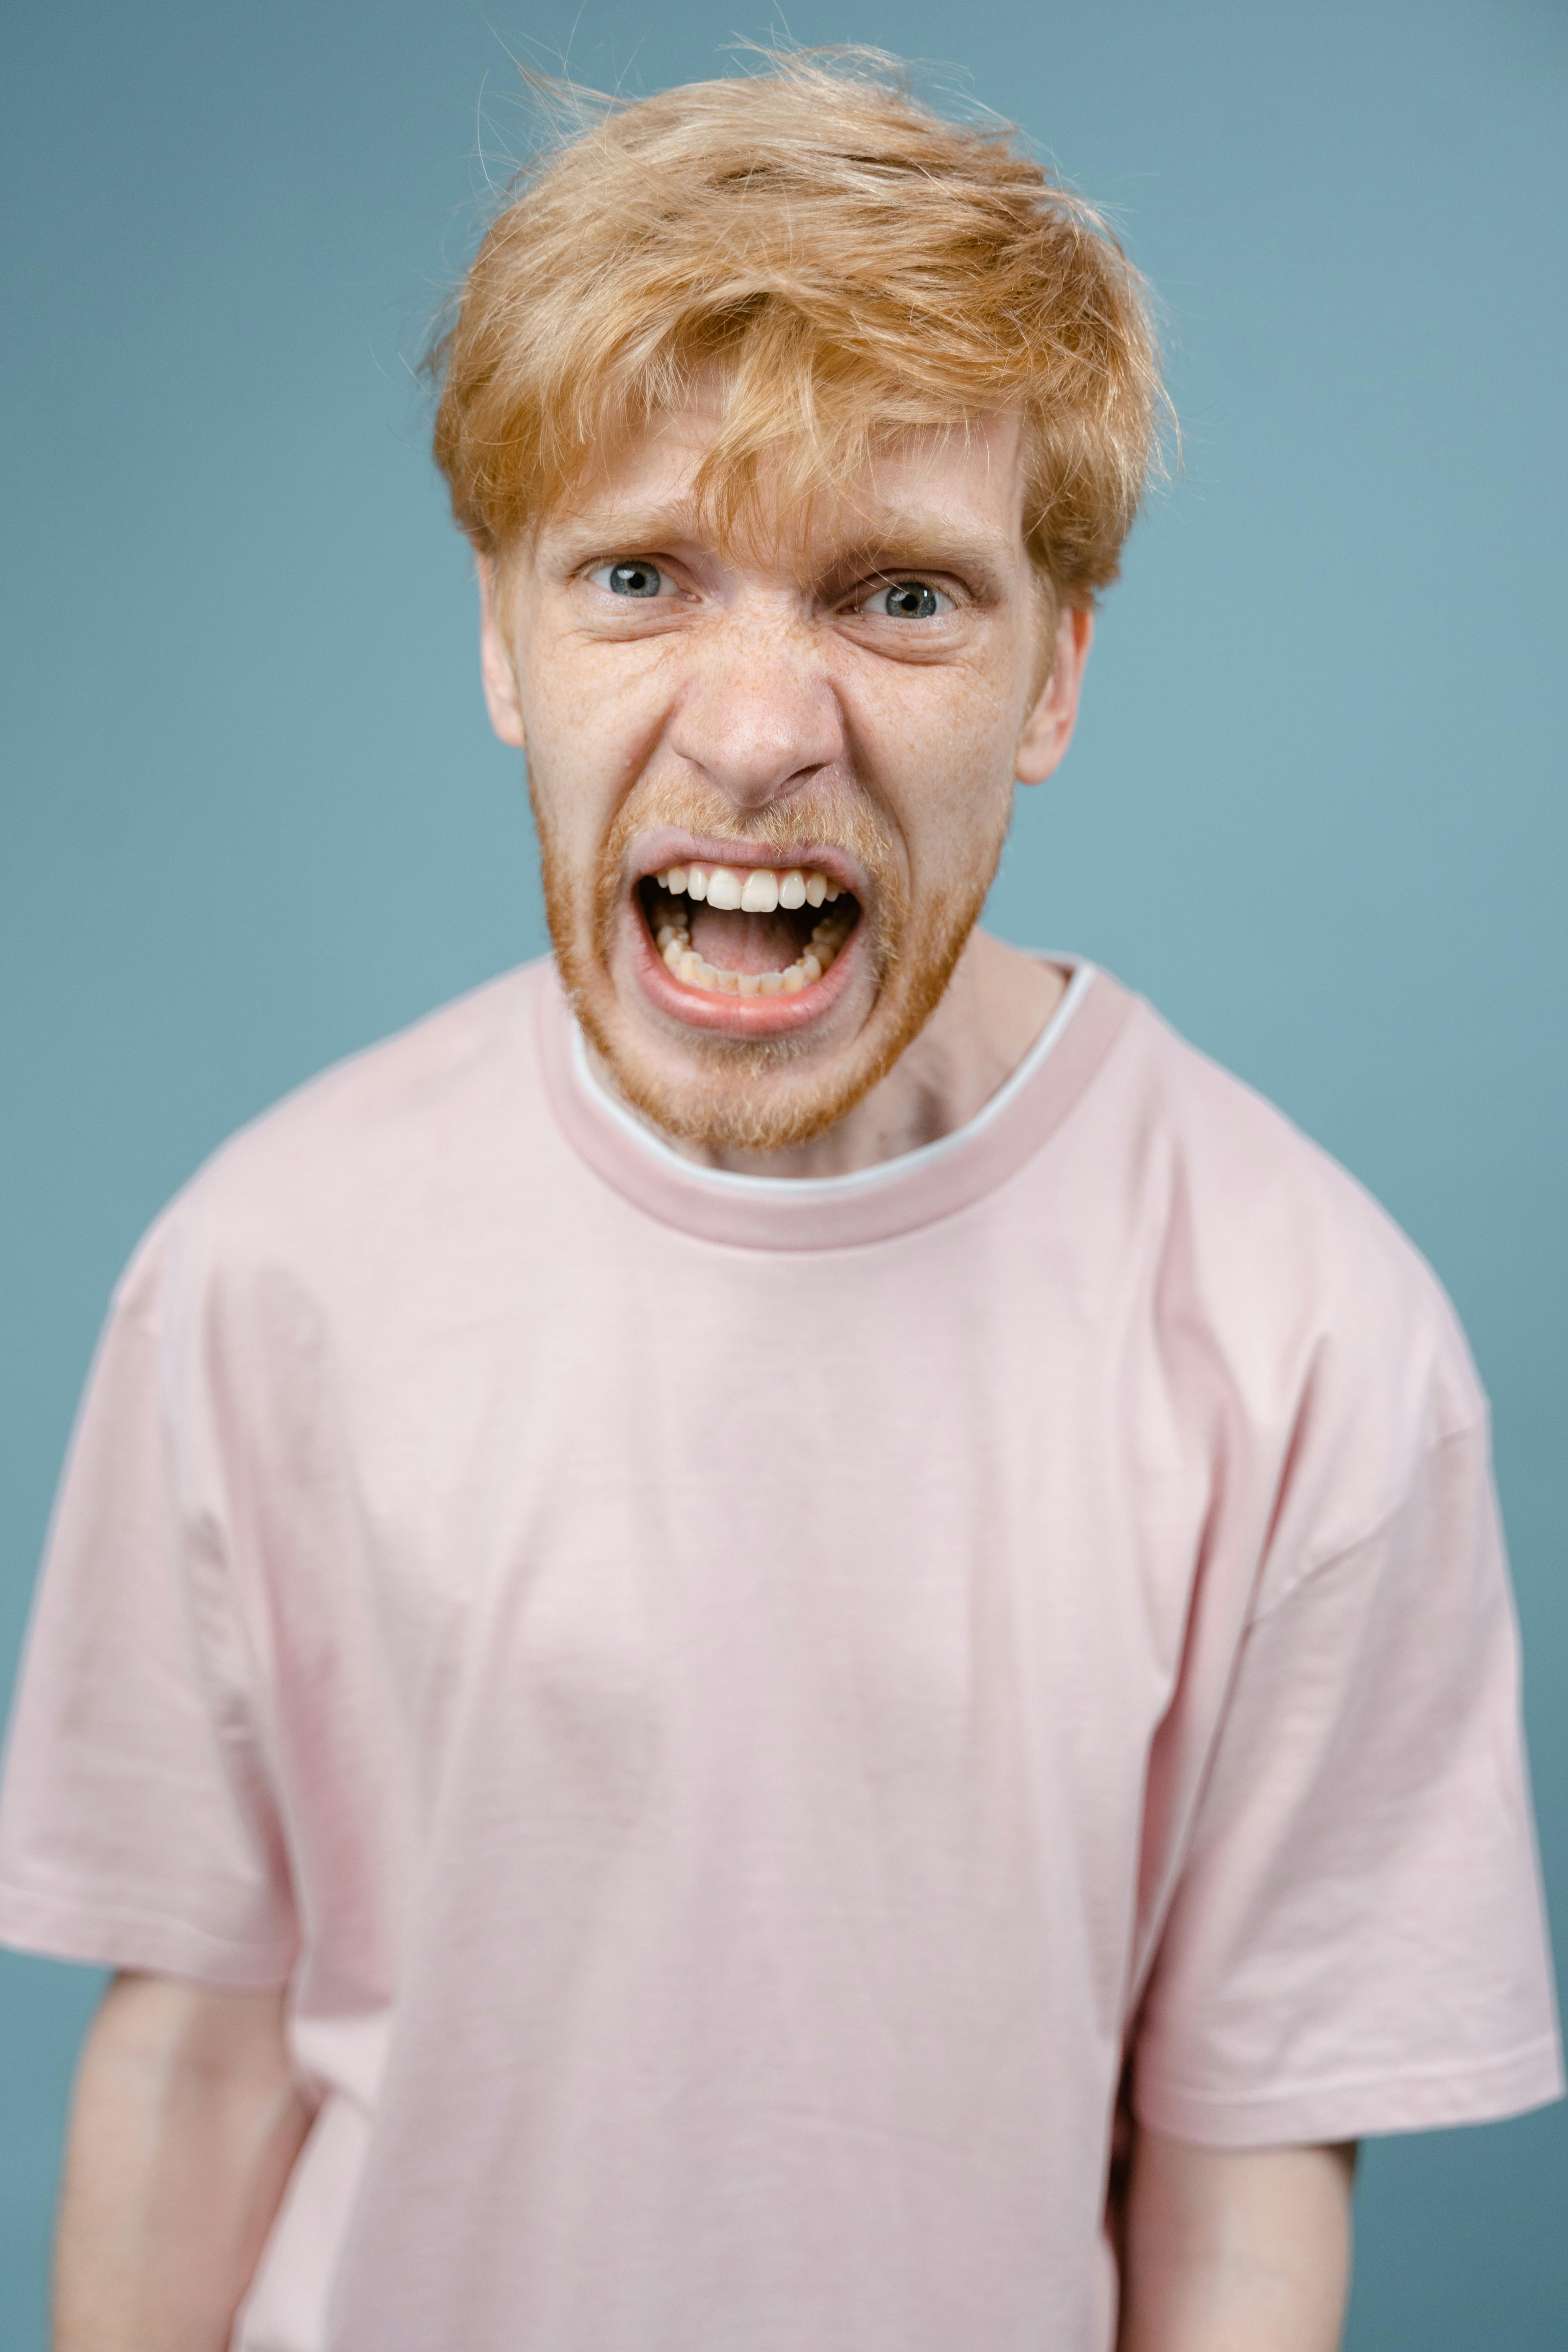 Angry frustrated man | Source: Pexels